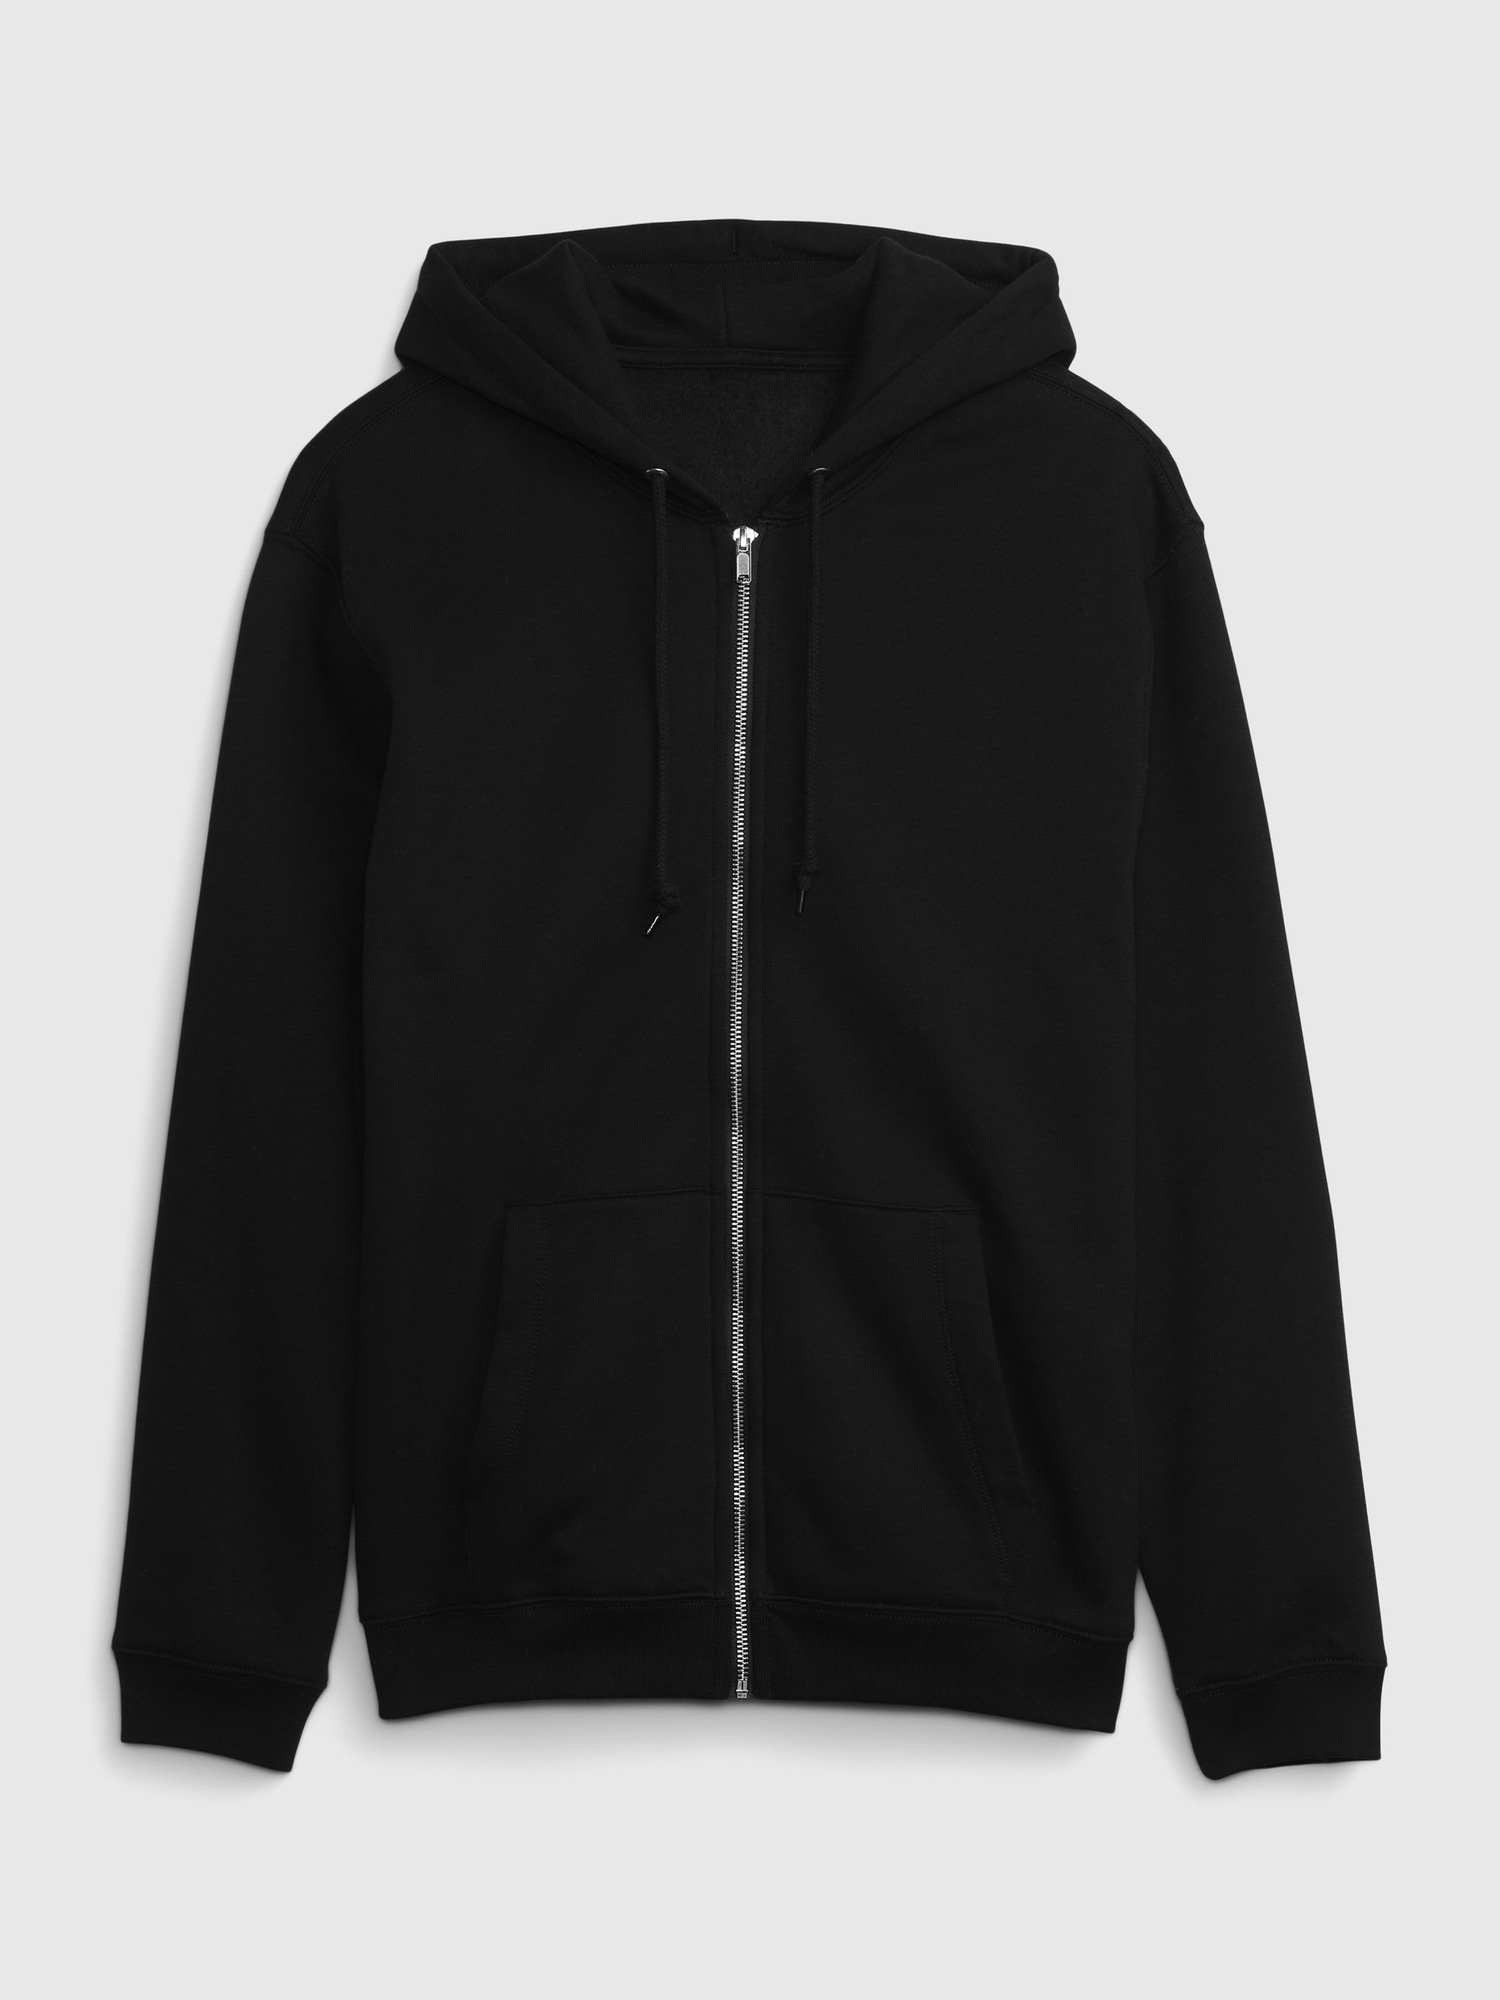 To keep or return?? Not usually a zip hoodie girl but this is